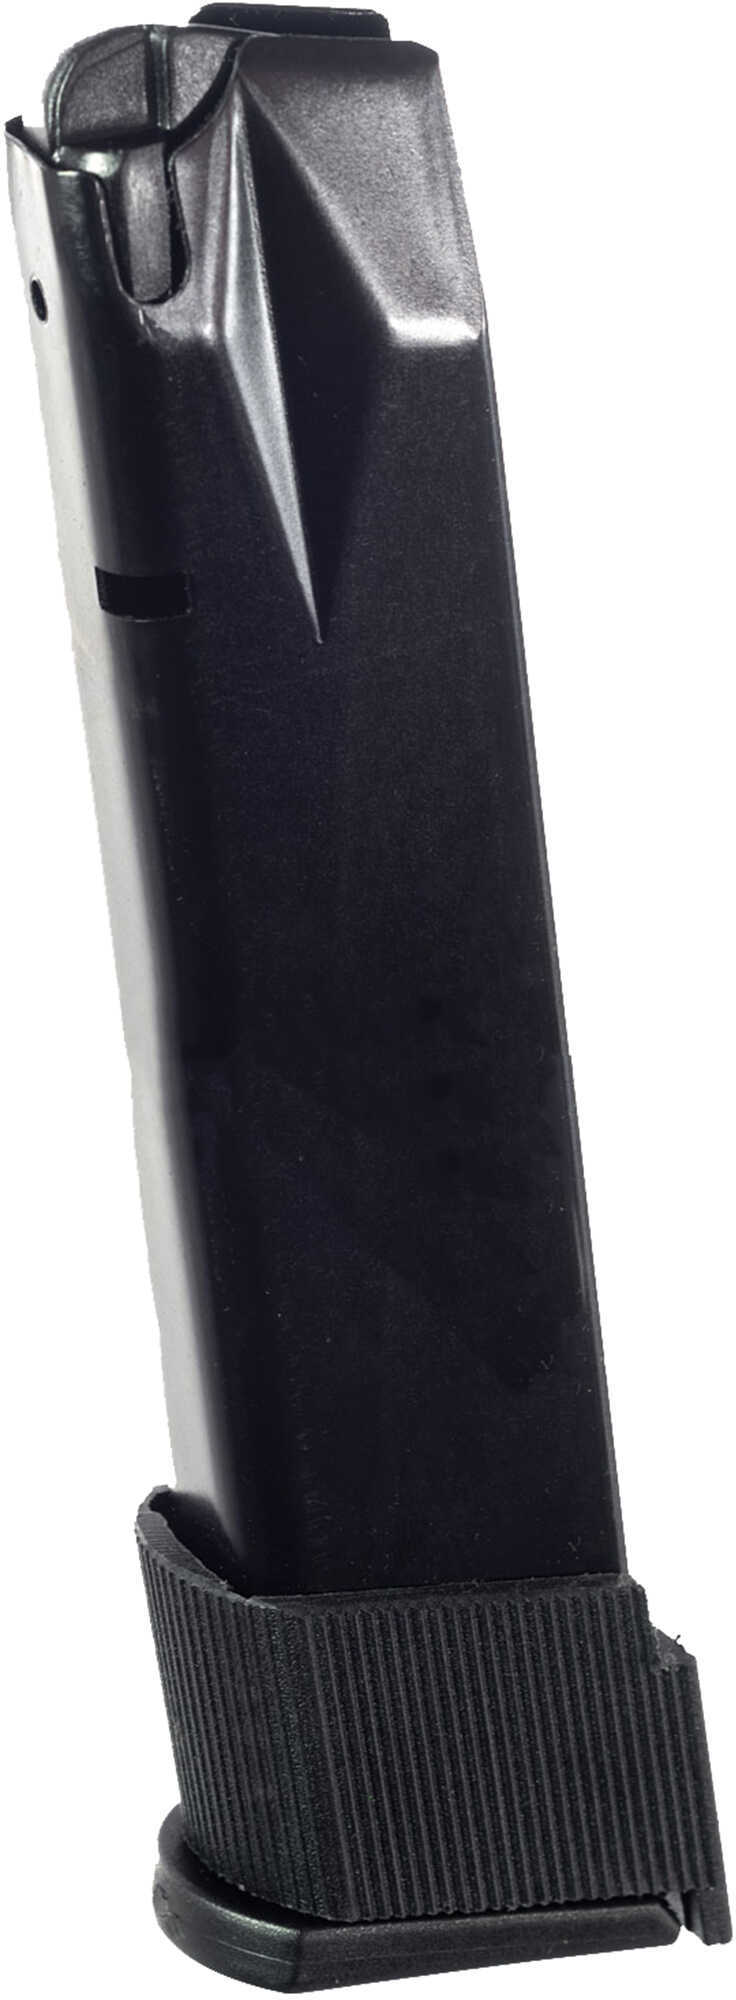 ProMag Taurus Pt 111 G2 Magazine 9mm, 32 Rounds, Blued Md: TAU-A7